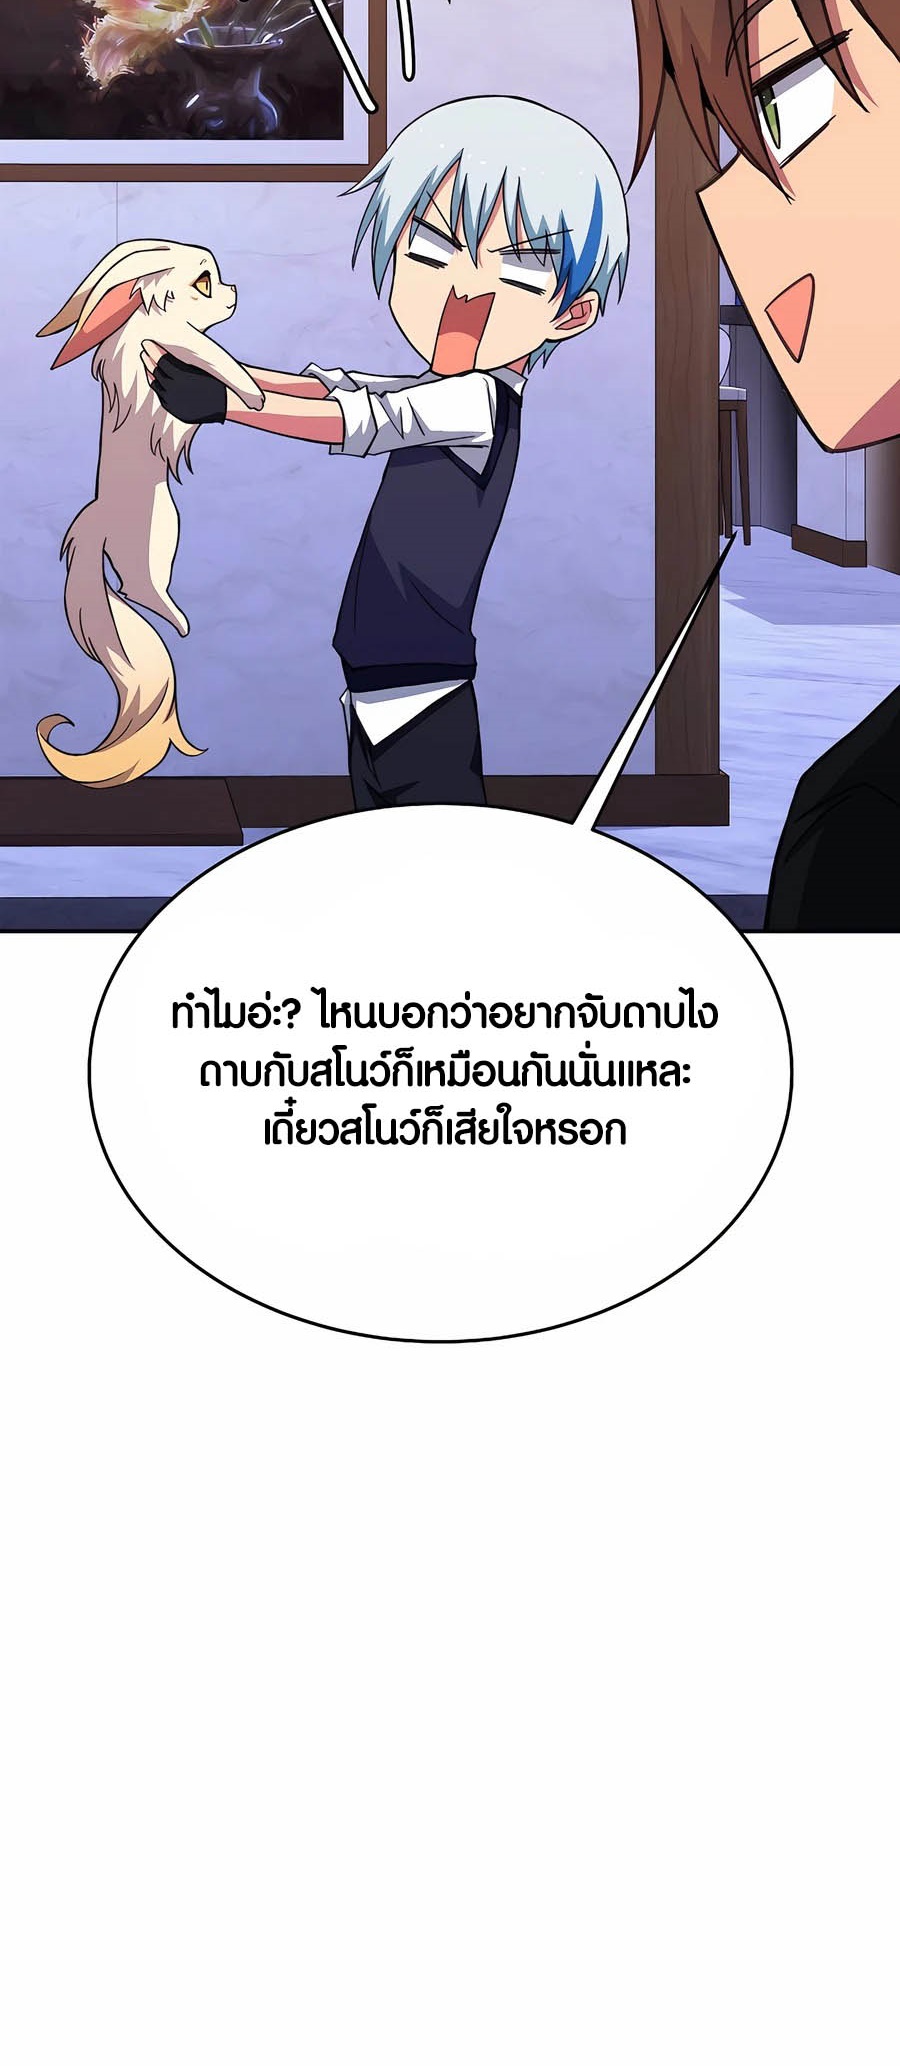 à¸­à¹ˆà¸²à¸™à¸¡à¸±à¸™à¸®à¸§à¸² à¹€à¸£à¸·à¹ˆà¸­à¸‡ The Part Time Land of the Gods 57 15